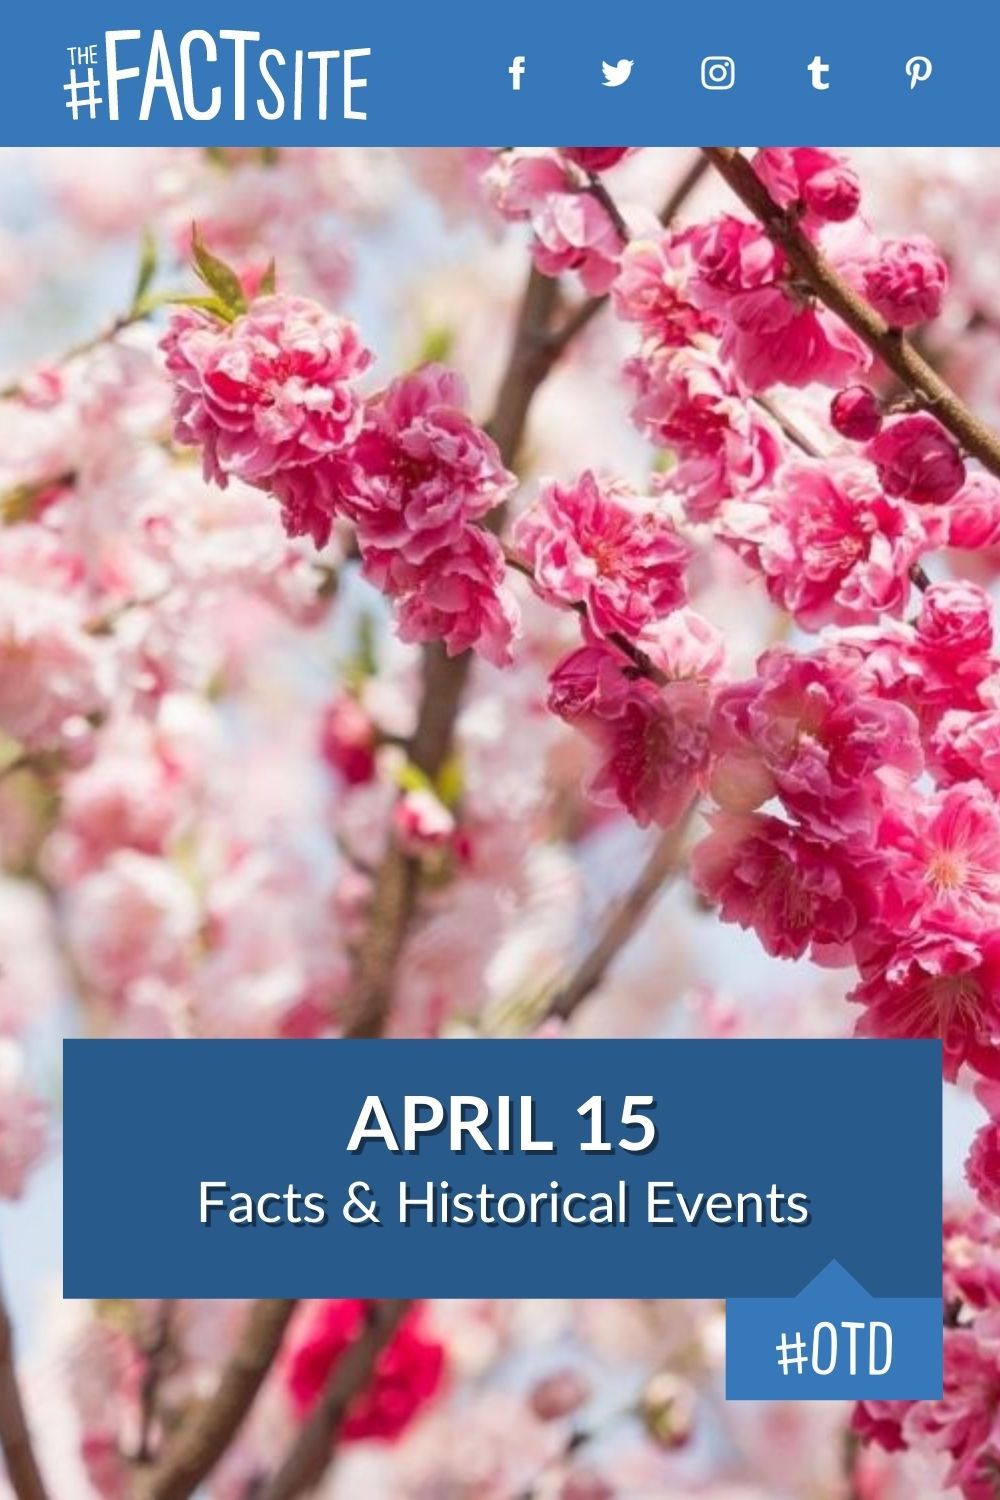 April 15: Facts & Historical Events On This Day